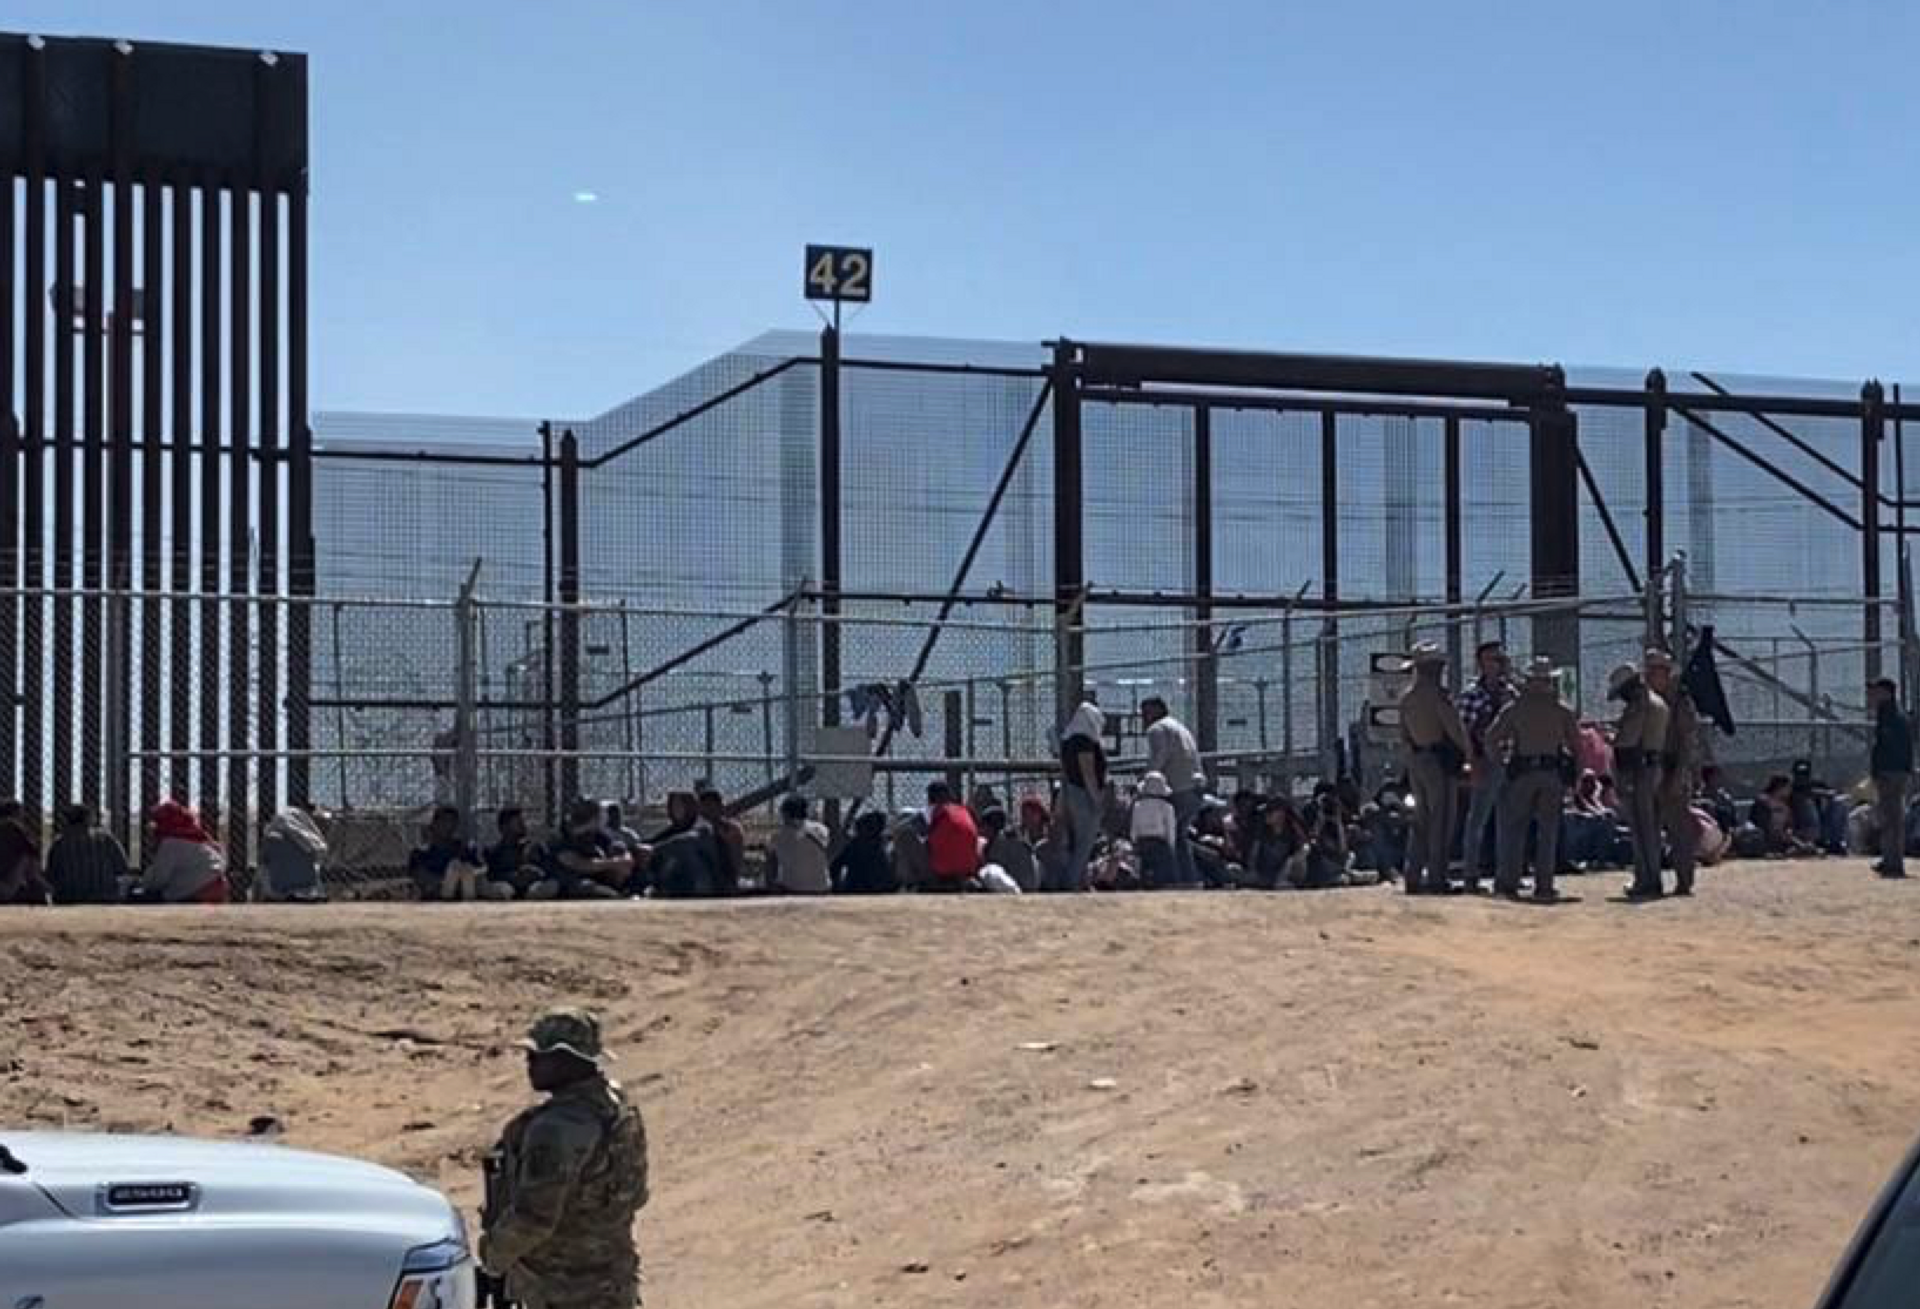 US law enforcement authorities are seen apprehending migrants on the US-Mexico border in El Paso, Texas, amid a recent surge ahead of the expiration of Title 42. - Sputnik International, 1920, 10.05.2023